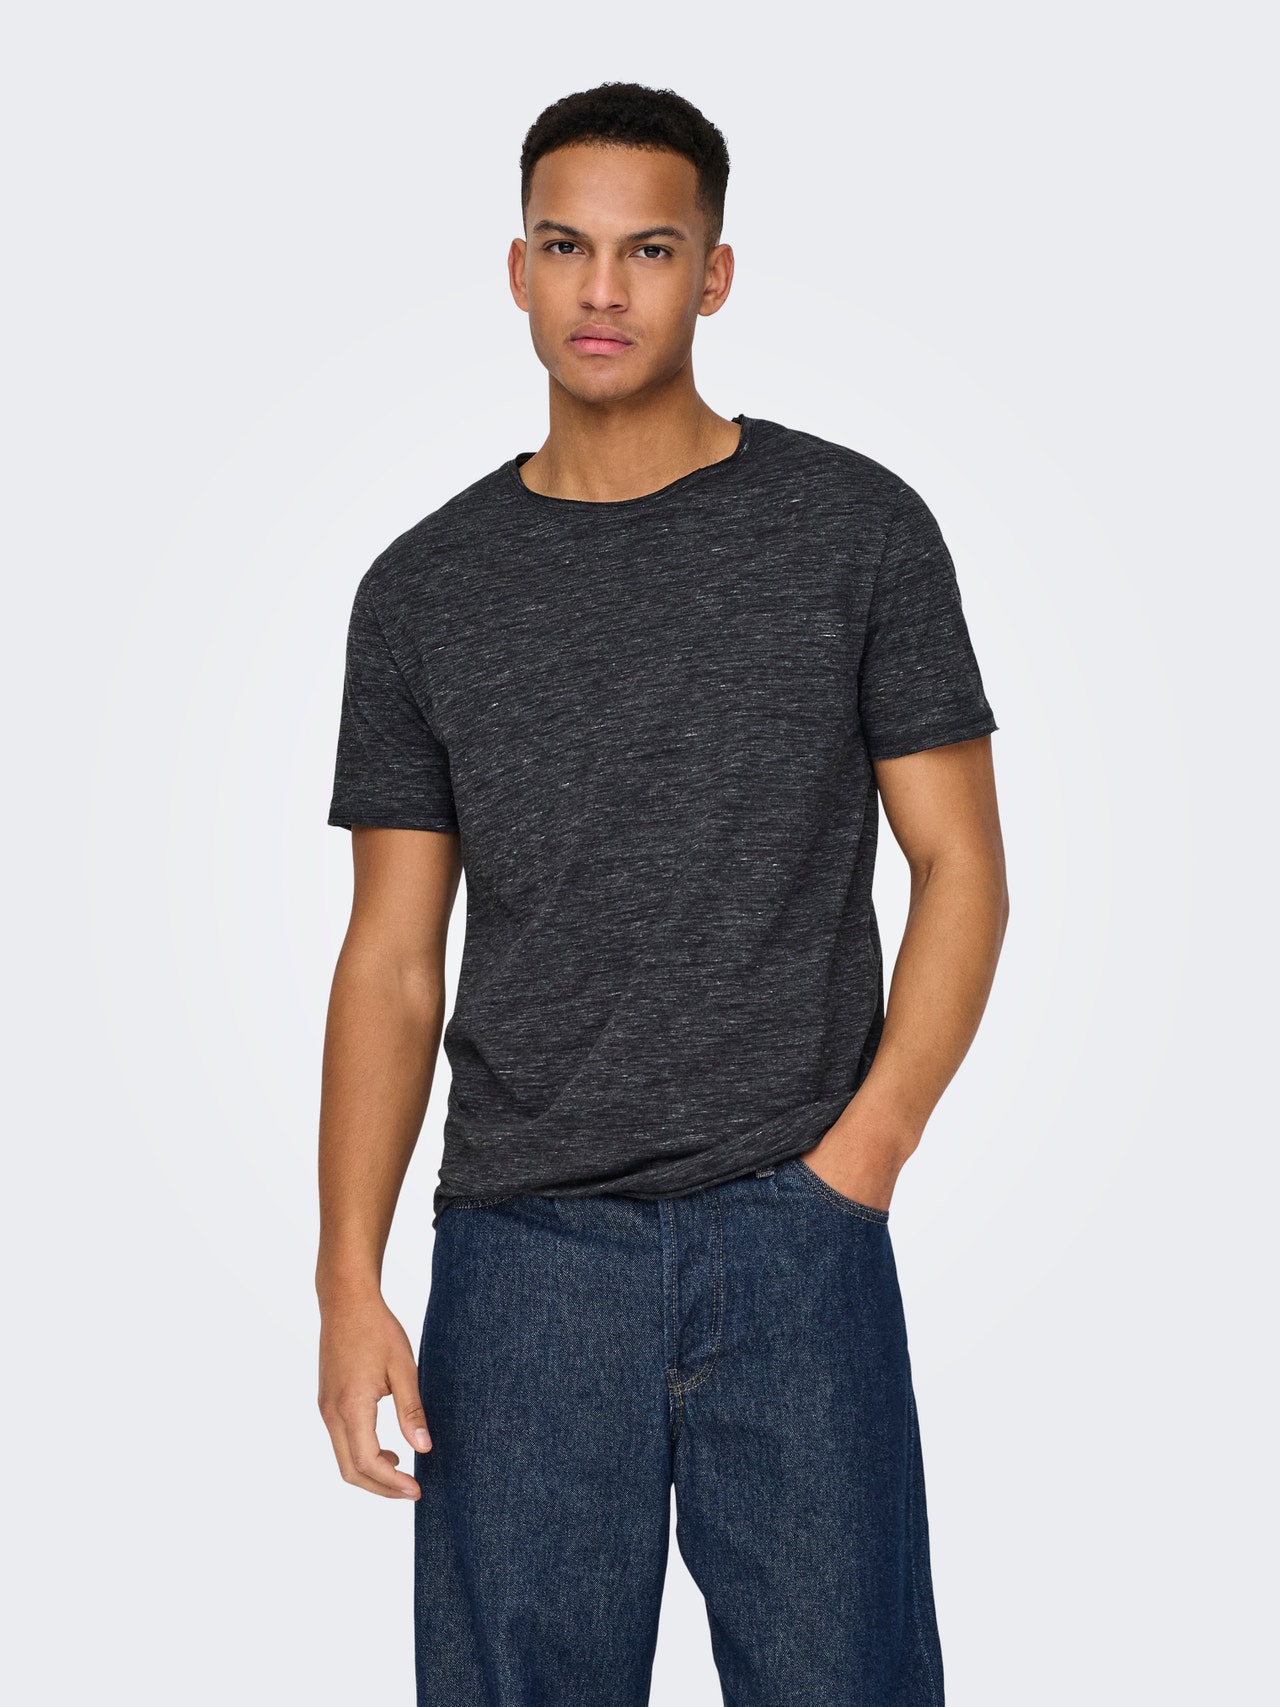 ONLY & SONS Regular Fit Round Neck T-Shirt -Black - 22005108